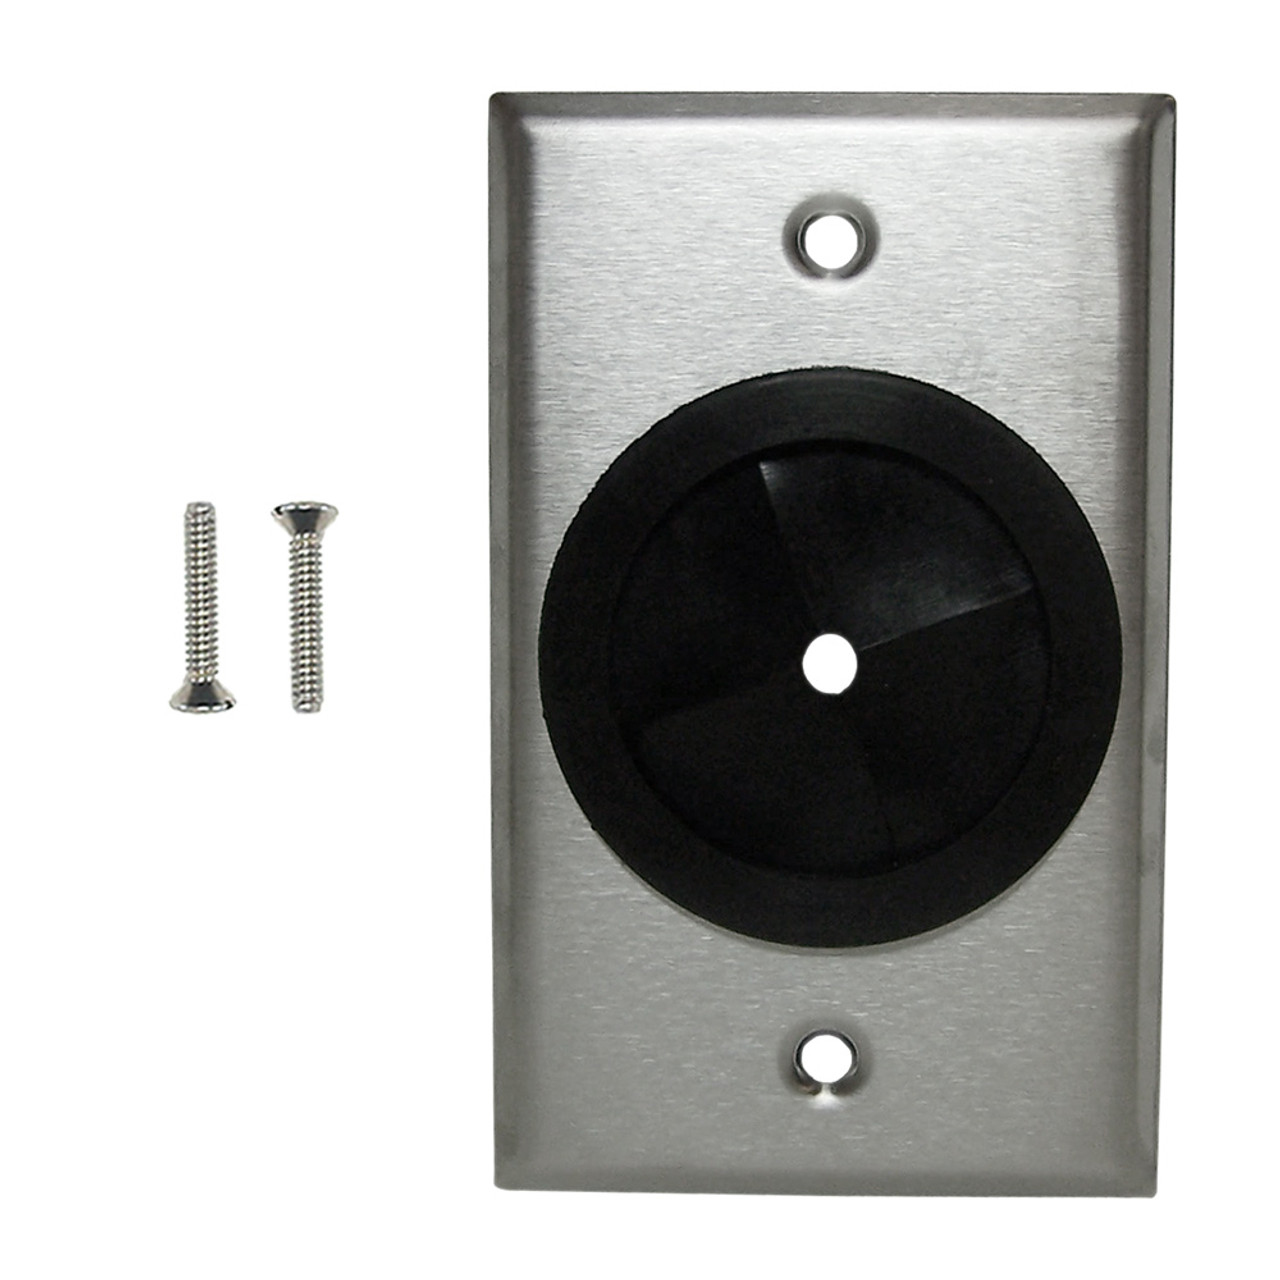 Cable Pass through Wall Plate Single Gang Stainless Steel